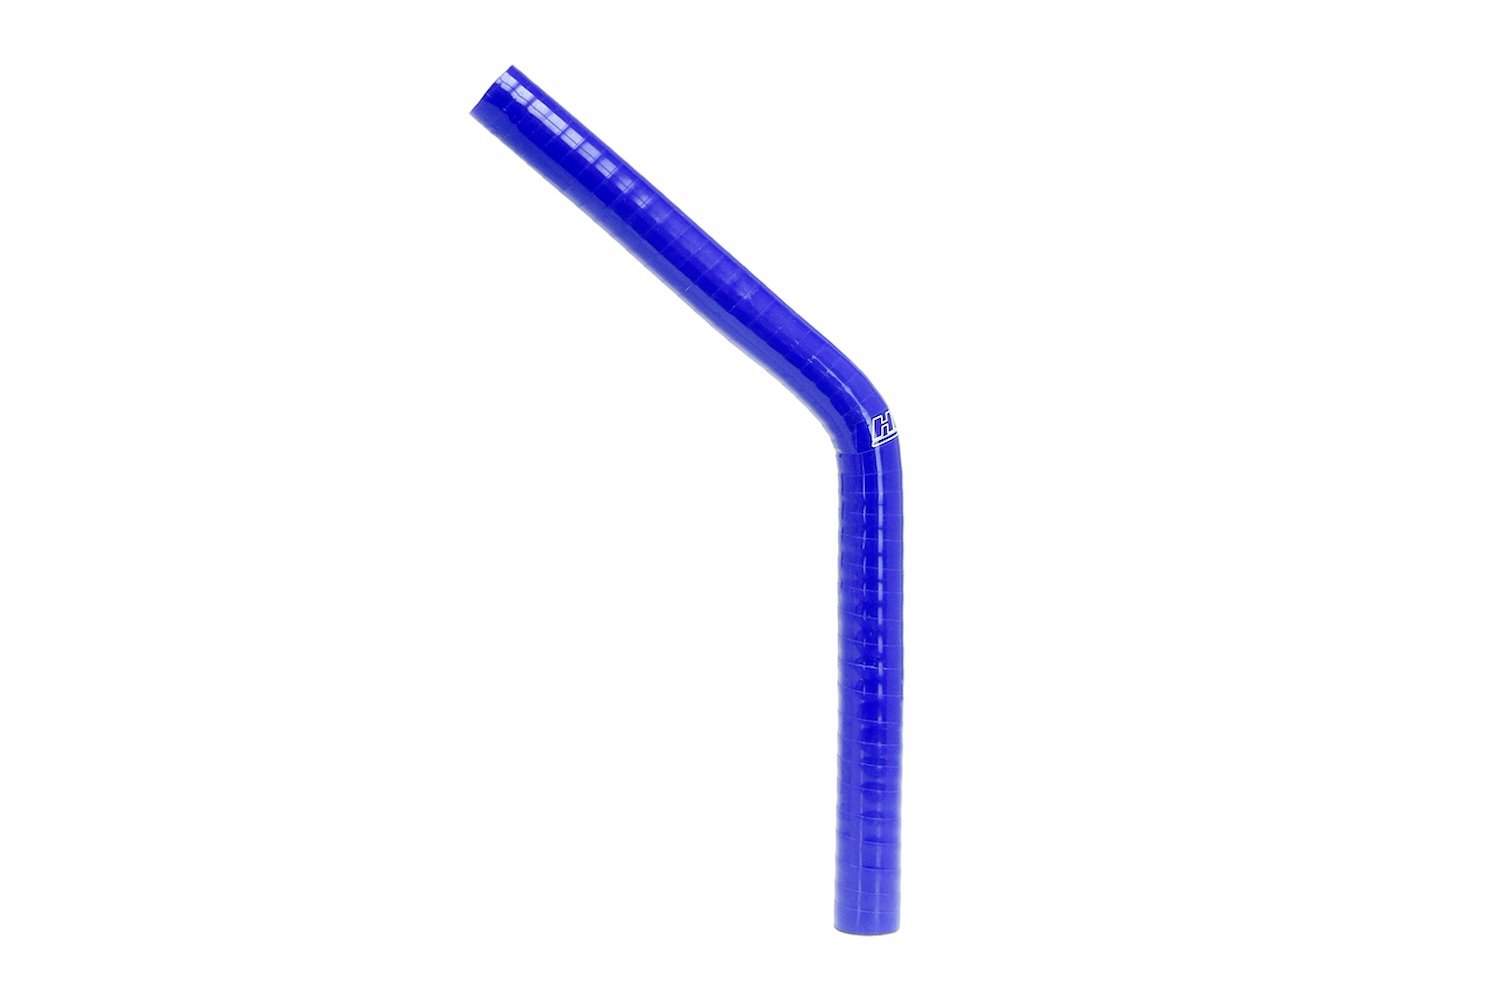 HTSEC45-032-L10-BLUE Silicone 45-Degree Elbow Hose, High-Temp 4-Ply Reinforced, 5/16 in. ID, 10 in. Leg, Blue